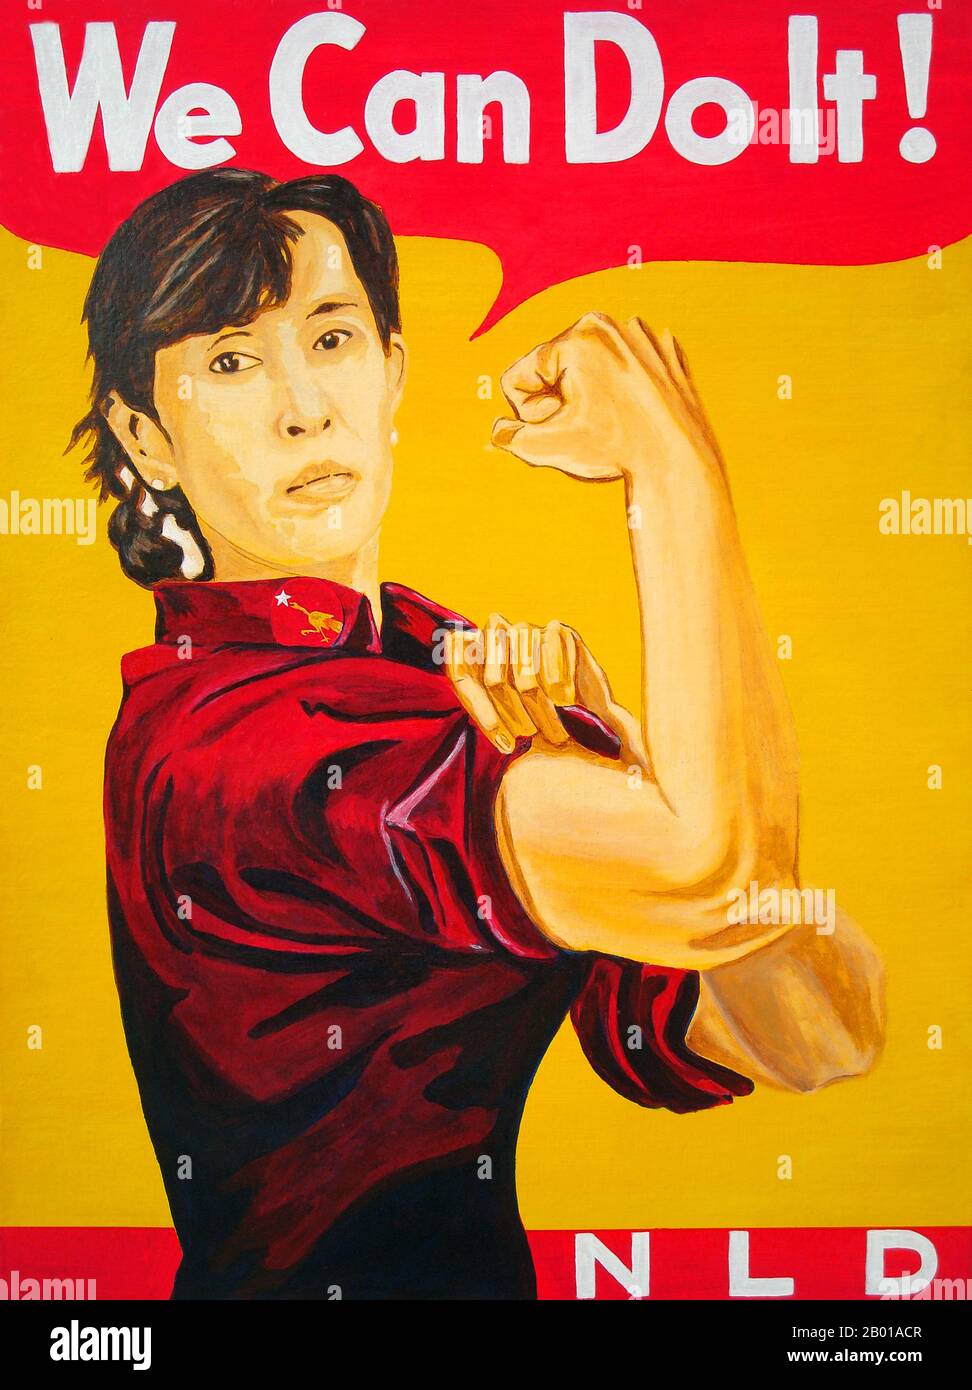 Burma/Myanmar: Aung San Suu Kyi (born 19 June 1945) in the style of 'Rosie the Riveter'. Artwork by Chadwick & Spector (CC BY-SA 3.0 License), 2008.  Aung San Suu Kyi  is a Burmese politician and diplomat who served as State Counsellor (equivalent to a Prime Minister) and Minister of Foreign Affairs from 2016 to 2021, when she was deposed by a military coup and arrested. On 6 December 2021, she was sentenced to four years in prison after several spurious charges were filed against her by the Tatmadaw (Myanmar Armed Forces). She was further sentenced to another nine years in total in 2022. Stock Photo